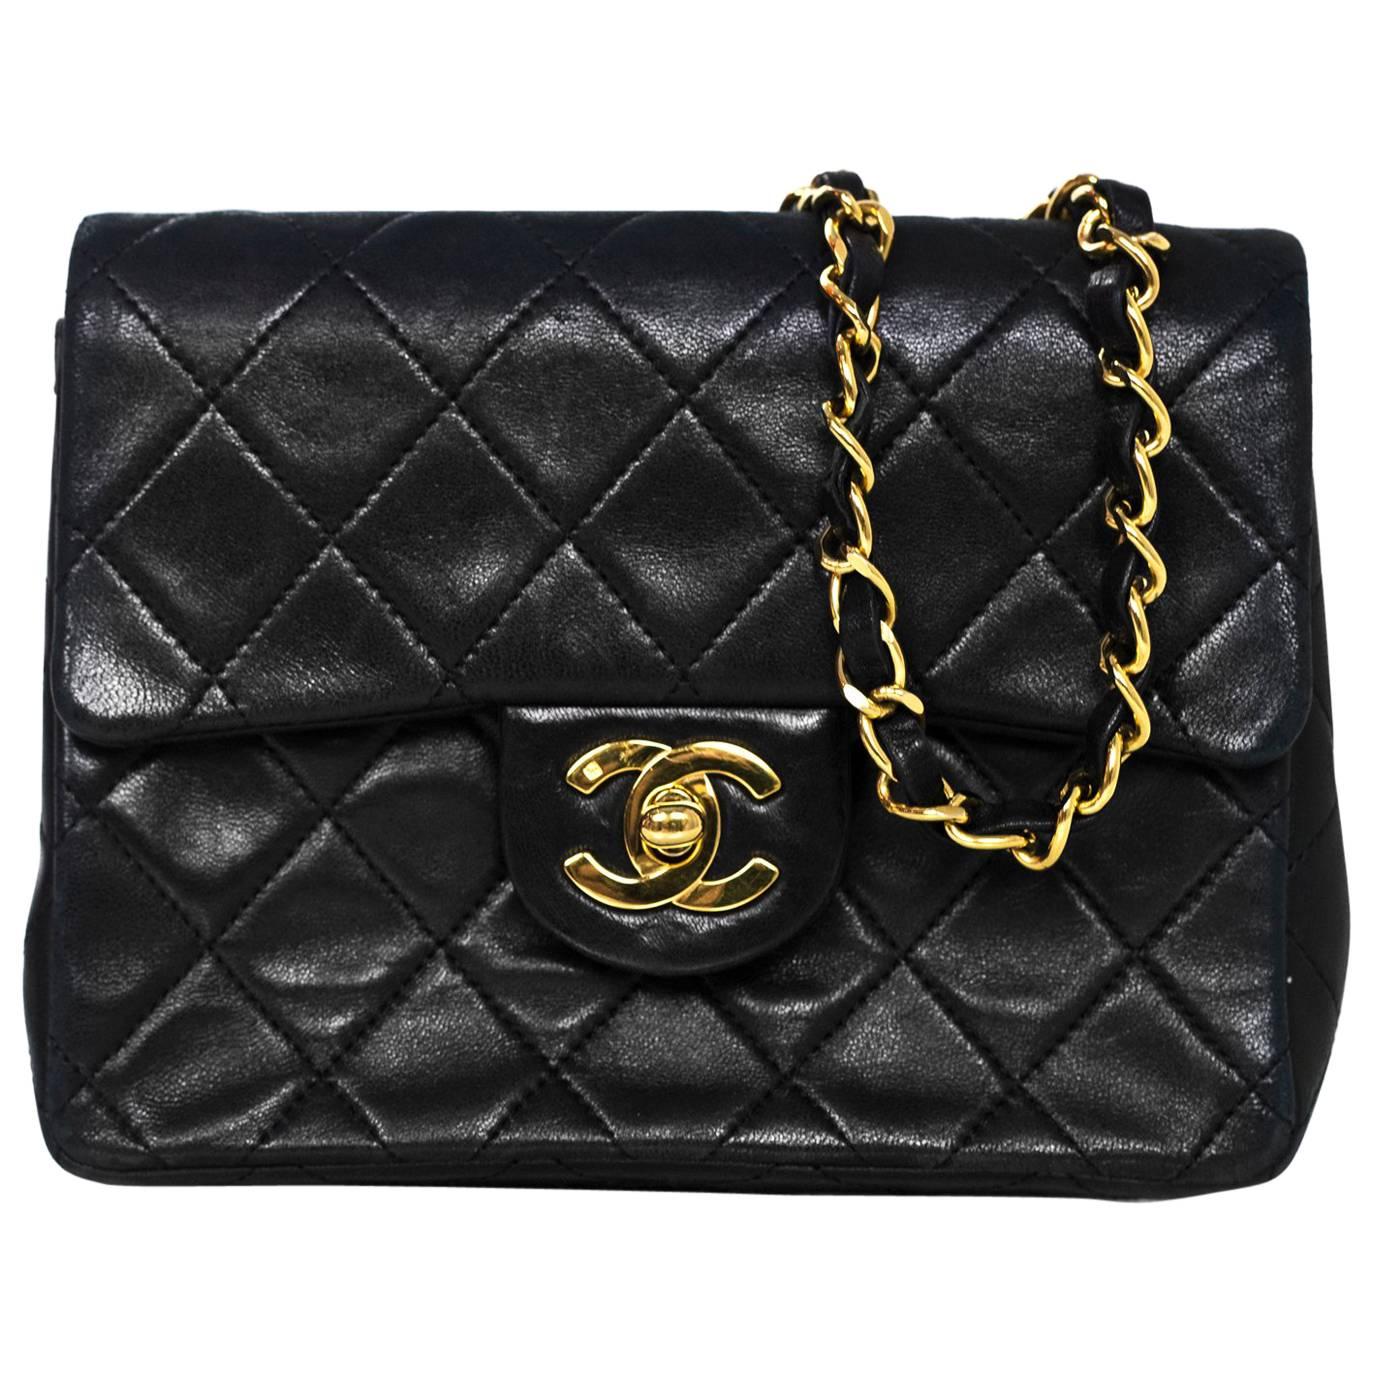 Chanel Vintage Black Quilted Lambskin Square Mini Flap Bag with DB